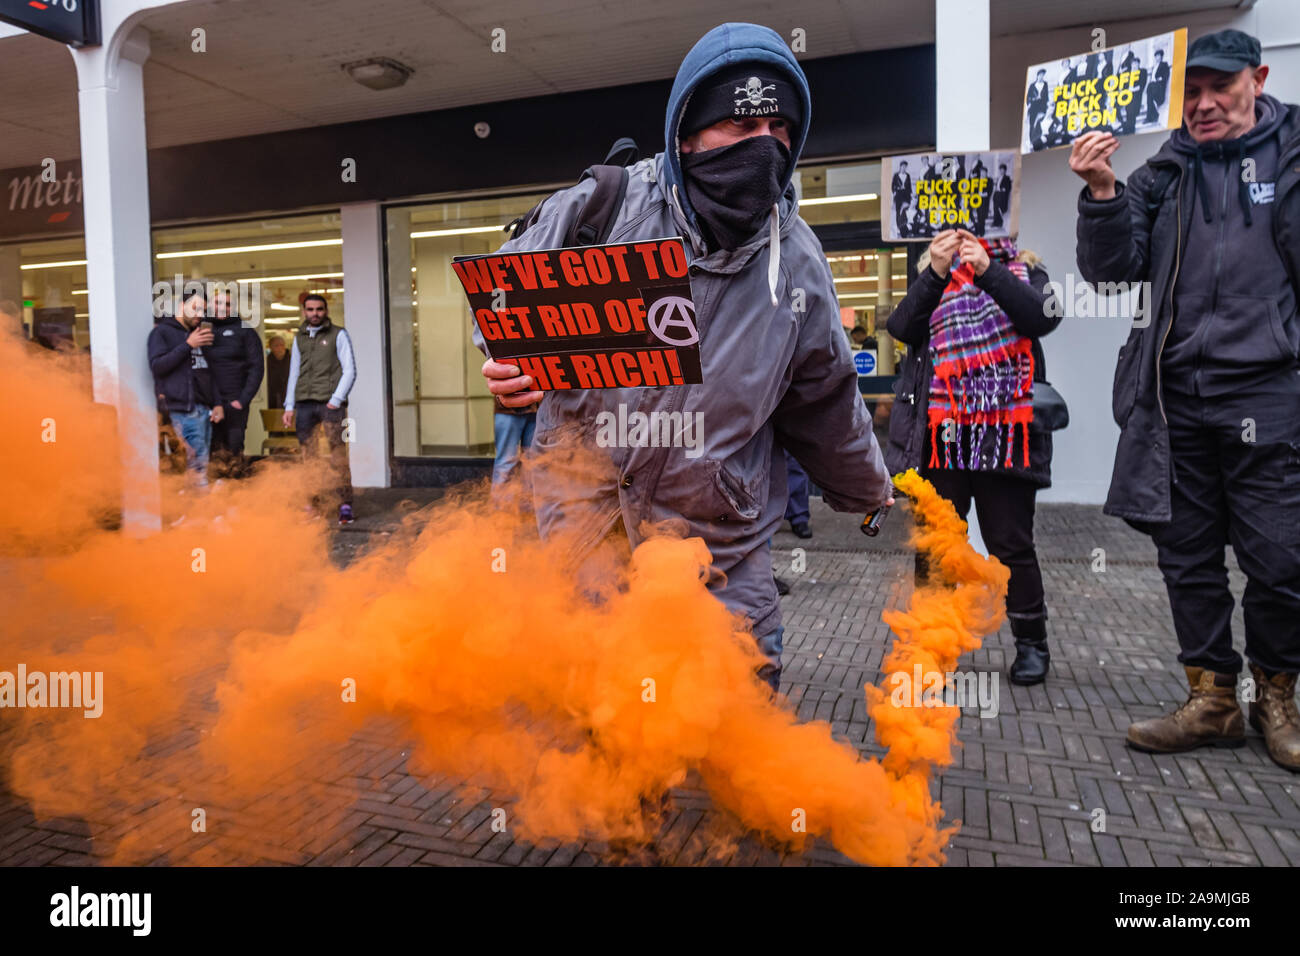 London, UK. 16th November 2019. Anarchists join the protest saying 'Why Vote? Revolt!' and set off an orange flare  as FCKBoris in orange knitted hats walk through Uxbridge shopping centre handing out fliers urging everyone to register and vote against Boris Johnson and kick him out for his racist, elitist politics. They marched with a sound system on a bus to Brunel University to persuade students. Johnson had a majority of just over 5 thousand in 2017 and Labour candidate Ali Milani has strong hopes of beating him and the other 10 candidates. Peter Marshall/Alamy Live News Stock Photo